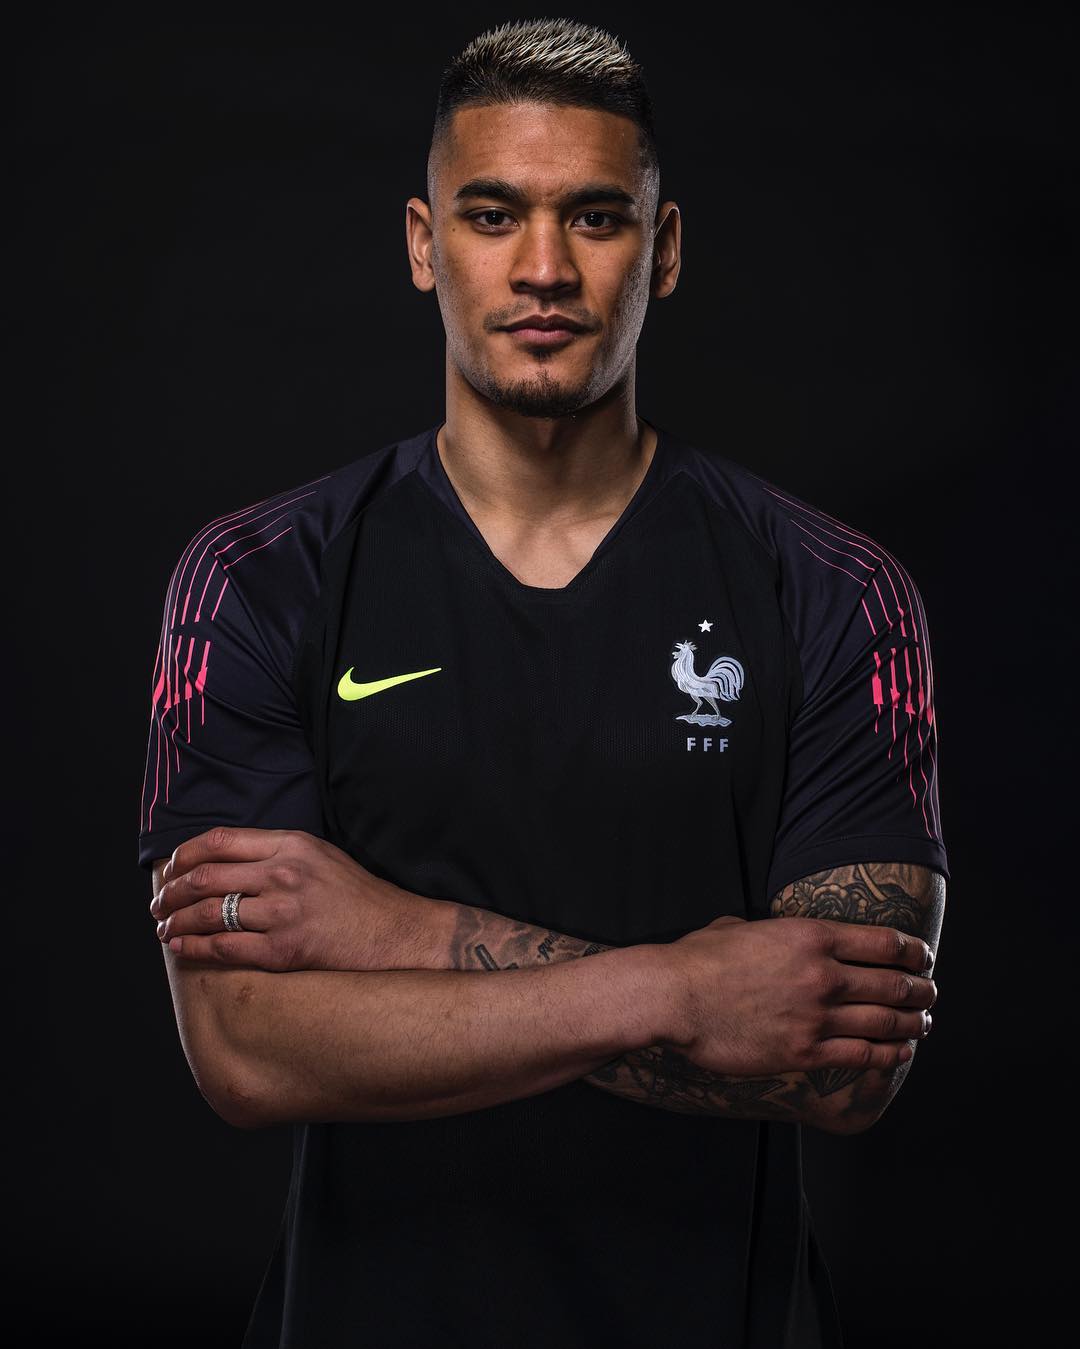 Wallpaper, France 2018 World Cup Squad